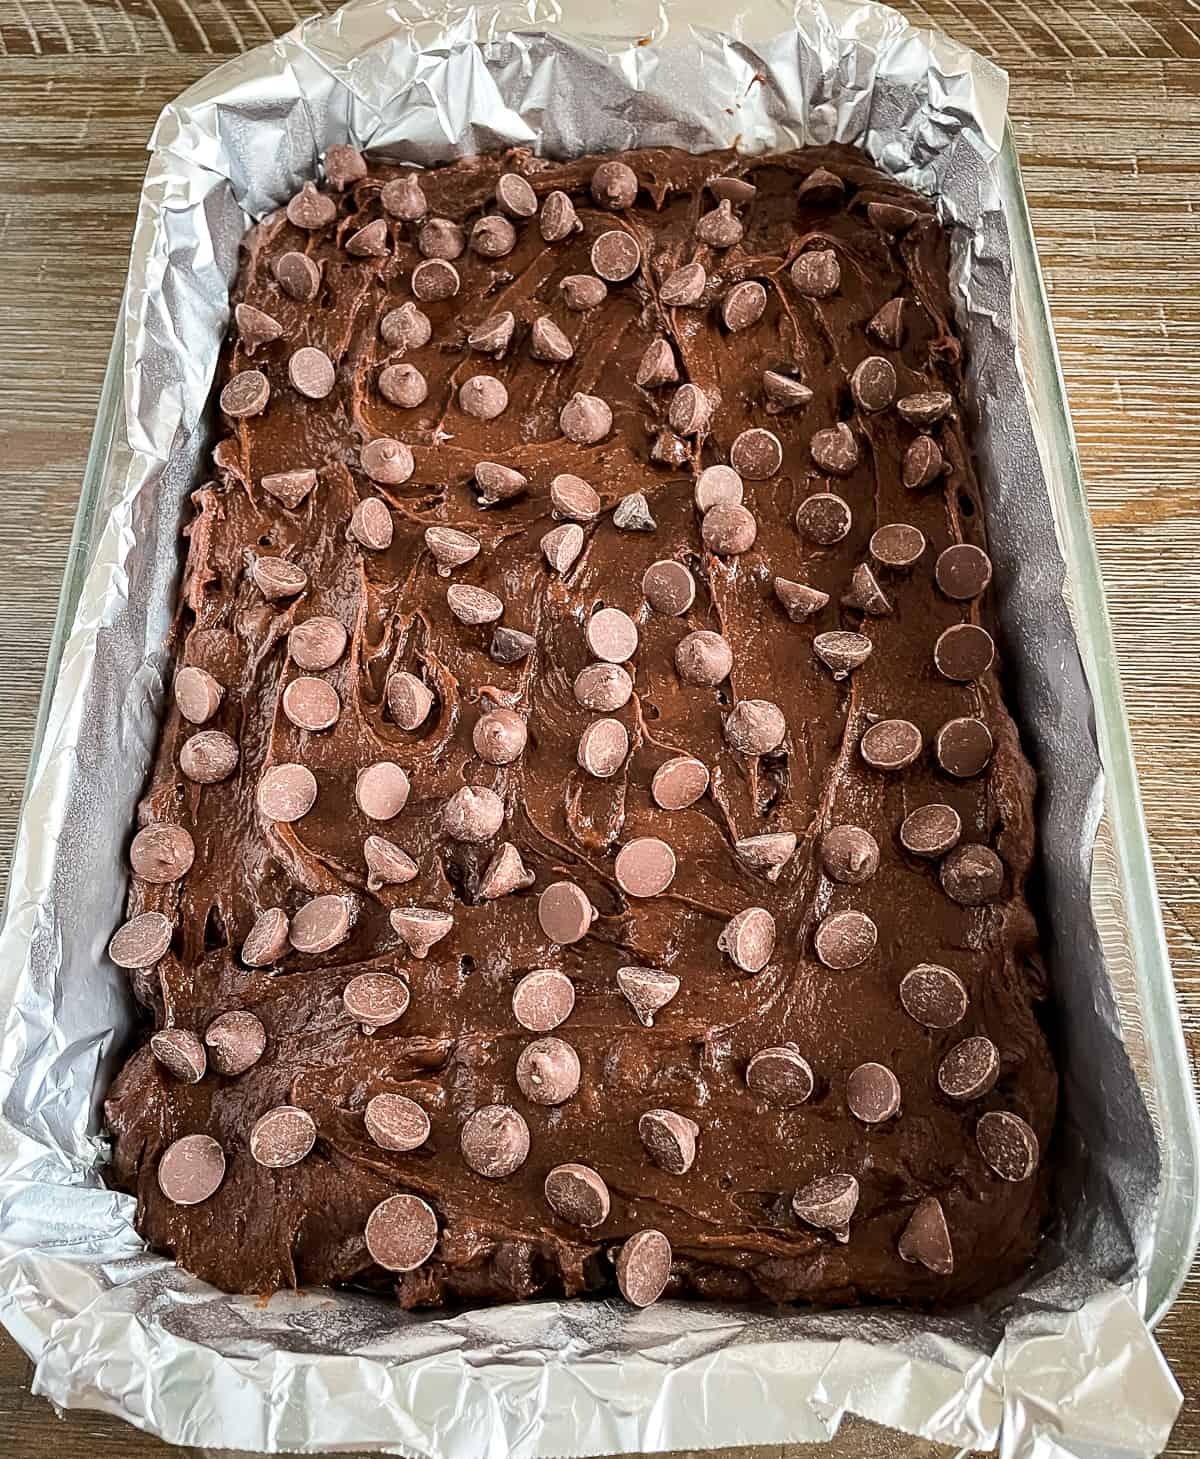 pan of unbaked brownies sprinkled with chocolate chips